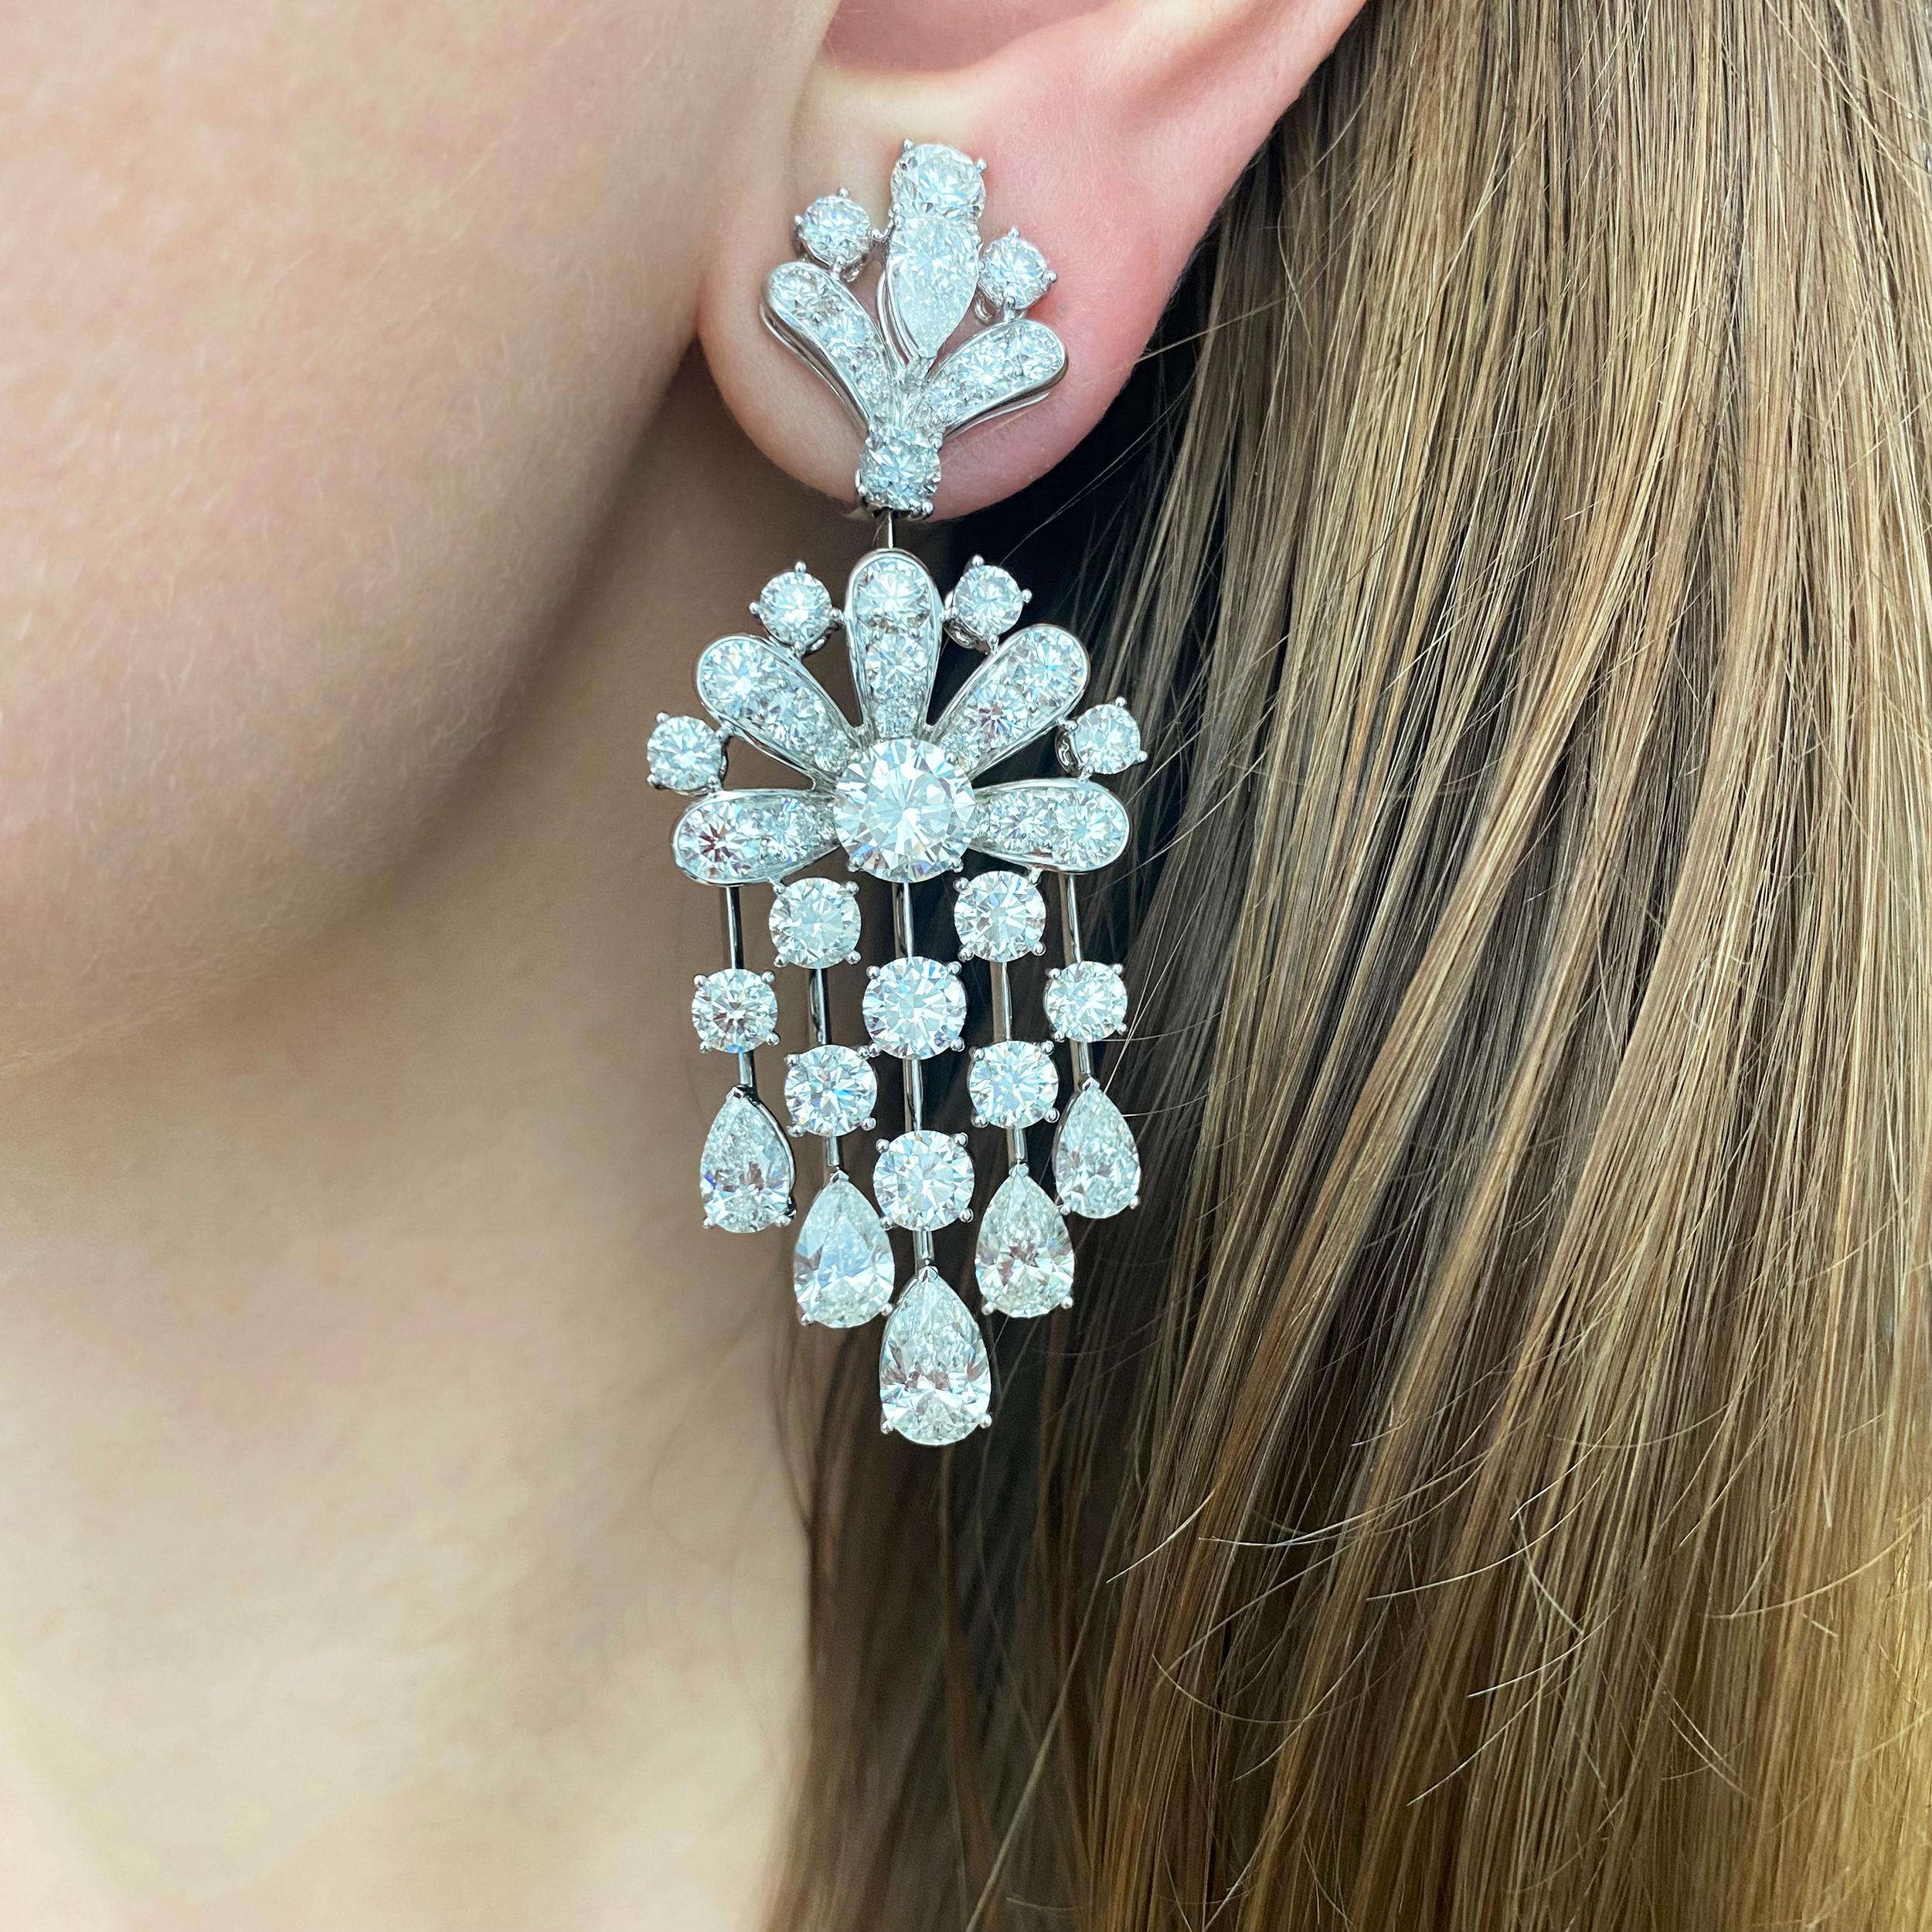 GRAFFf Pair of Platinum and Diamond 'Waterfall' Pendant-Earrings The pair of earrings are topped by a stylized fan motif of 2 marquise-shaped and 20 round diamonds, suspending a flower motif centering 2 round GIA Certified diamonds 2.54 carats
